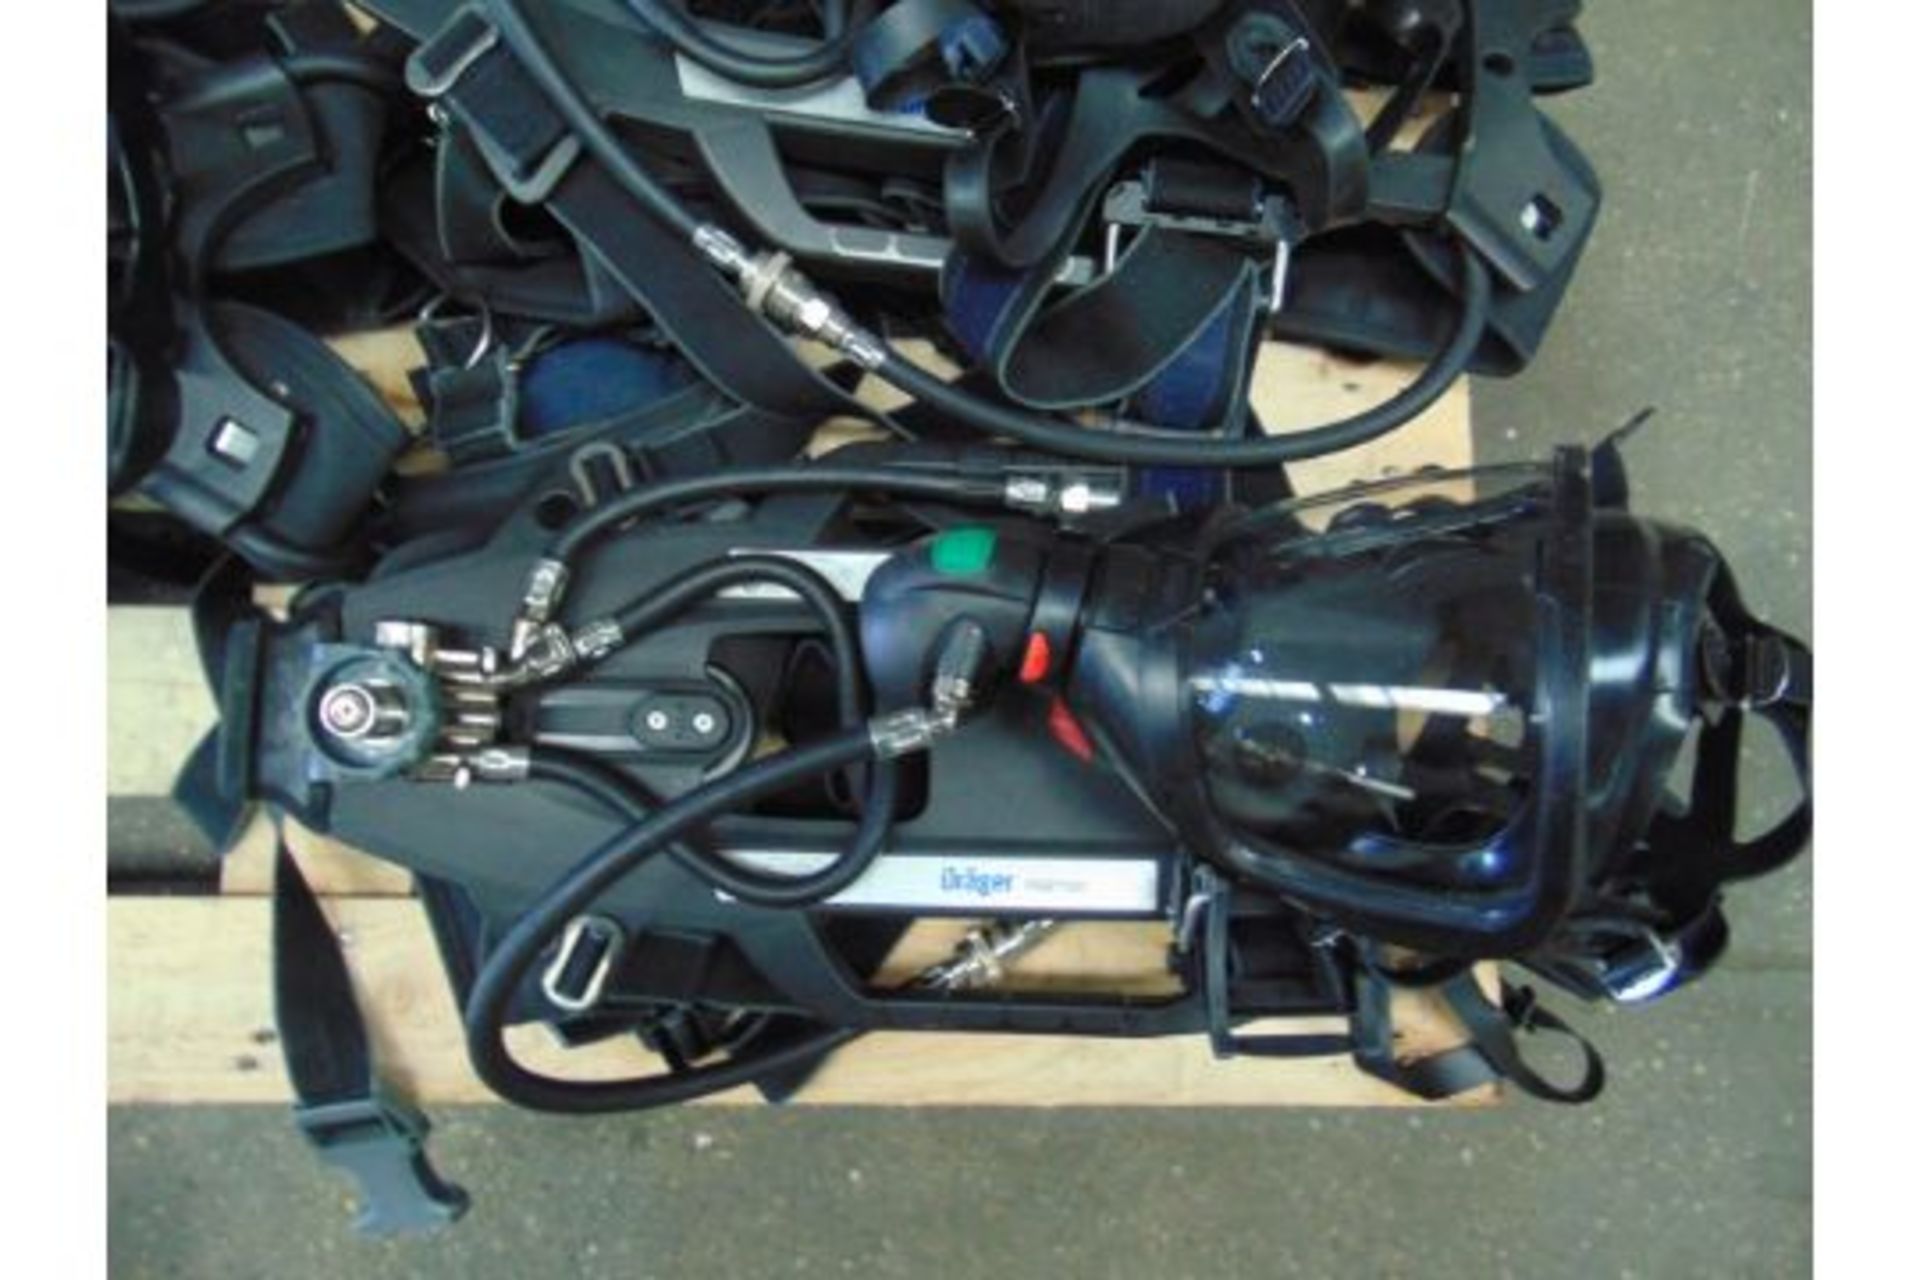 5 x Drager PSS 7000 Self Contained Breathing Apparatus w/ 10 x Drager 300 Bar Air Cylinders - Image 13 of 28